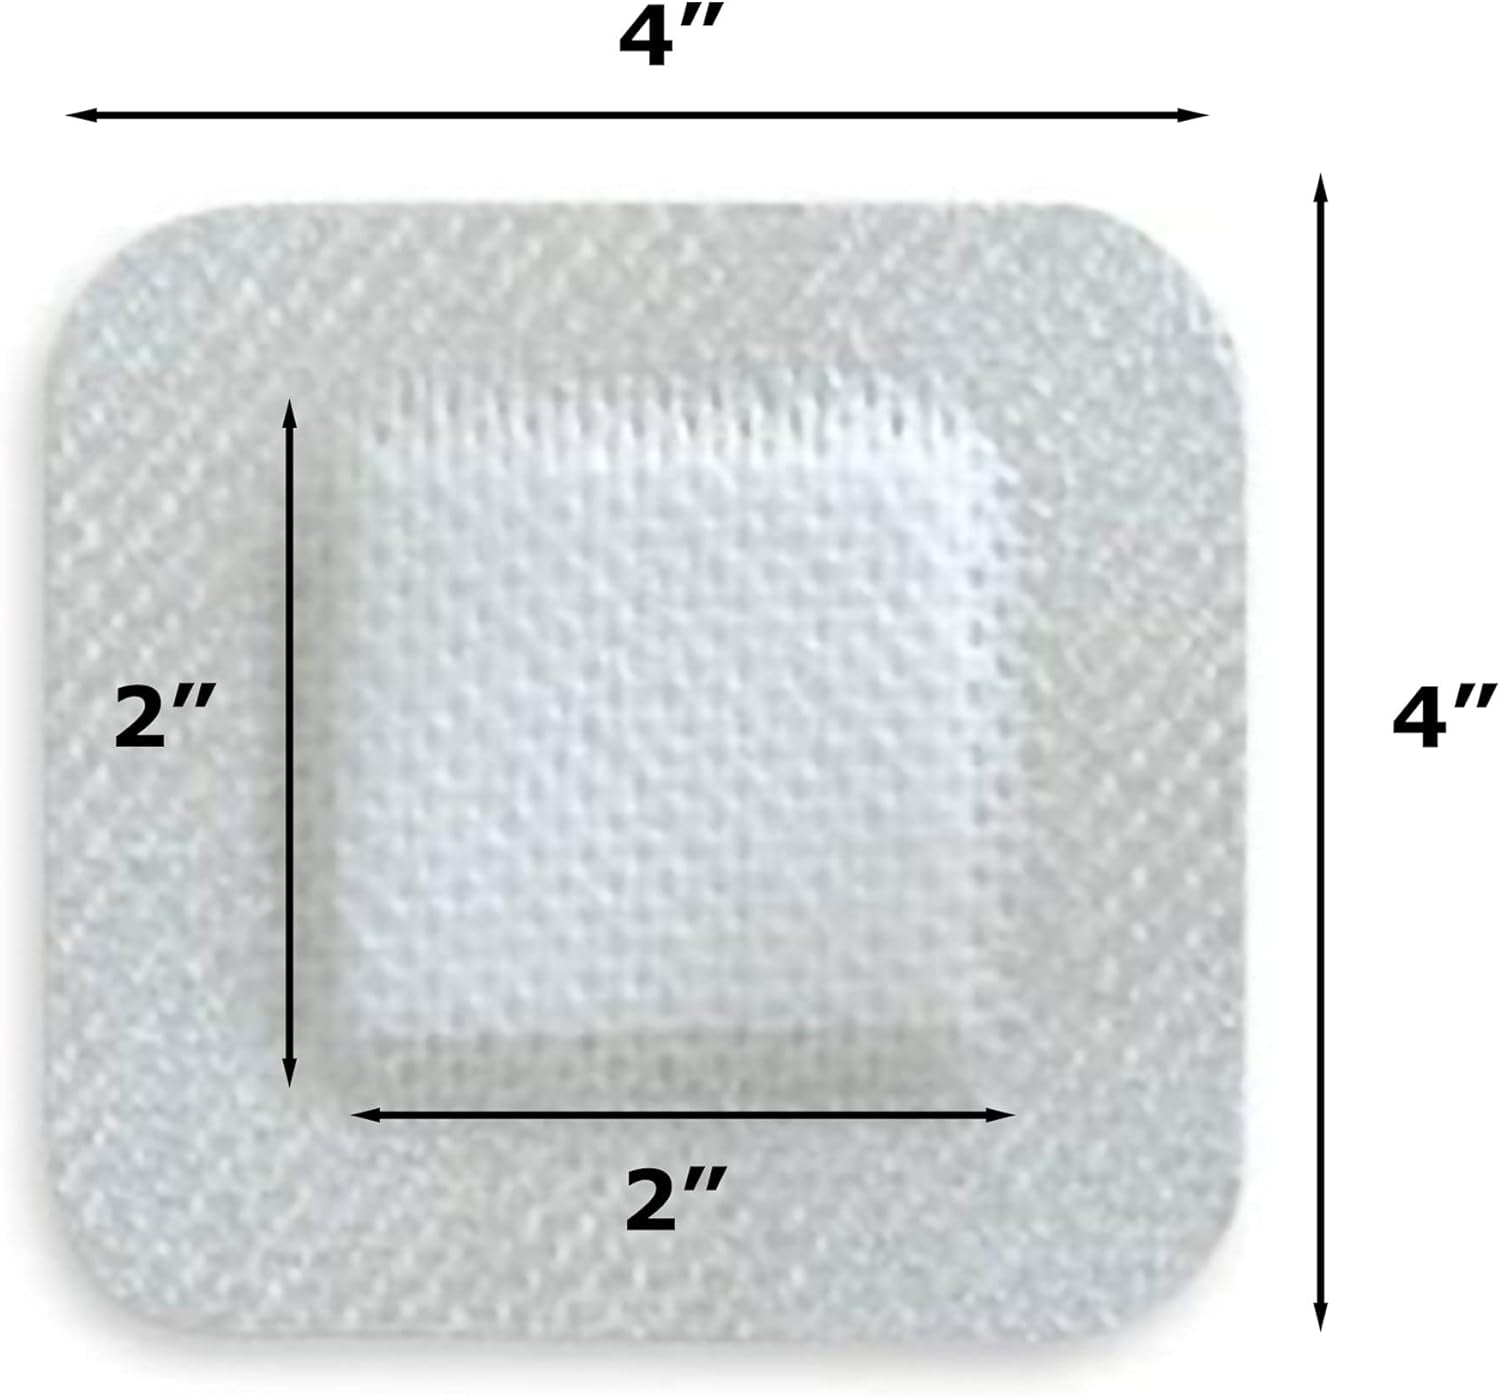 McKesson Adhesive Dressings, Non-Sterile, Dimension 4 in x 4 in, Pad 2 in x 2 in, 30 Count, 4 Packs, 120 Total